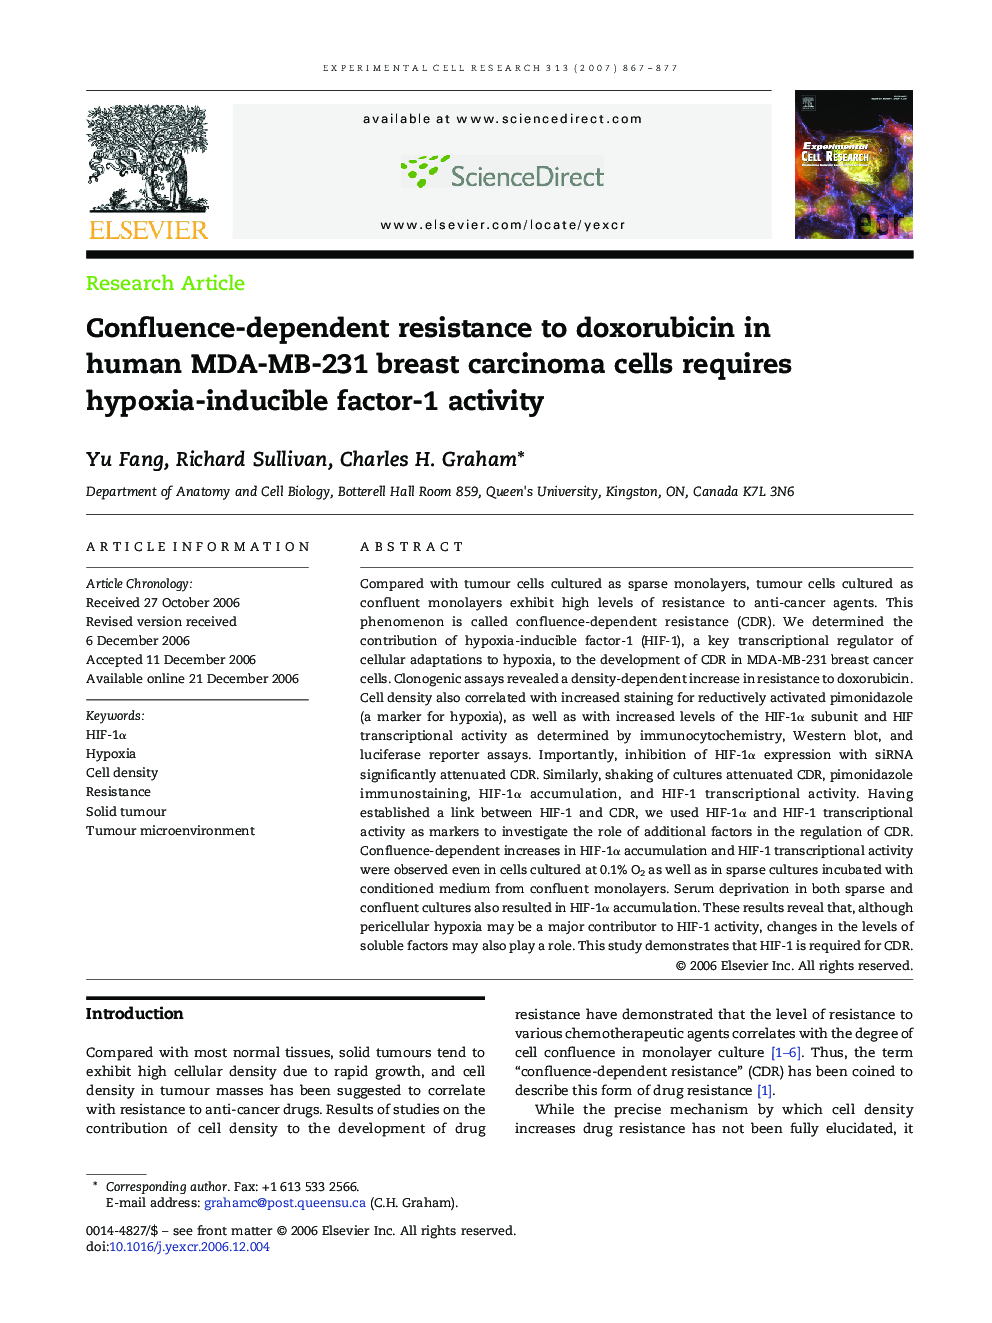 Confluence-dependent resistance to doxorubicin in human MDA-MB-231 breast carcinoma cells requires hypoxia-inducible factor-1 activity